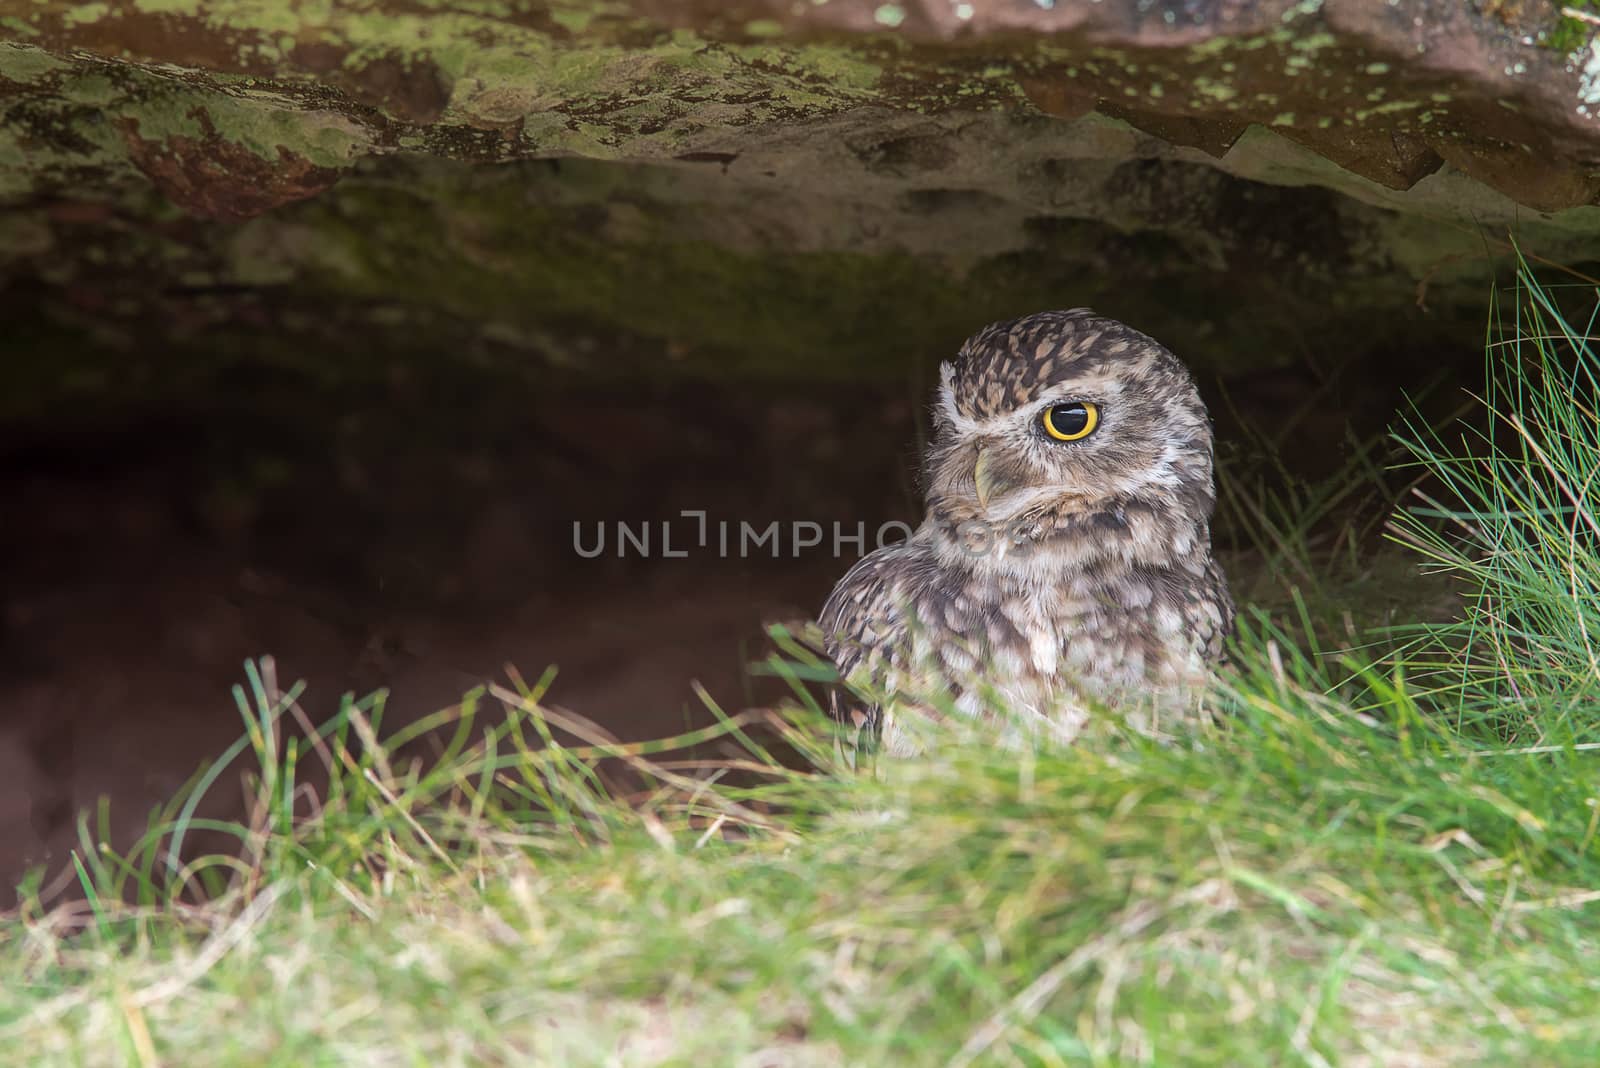 A very alert looking burrowing owl hiding under a rock and looking to the left in a natural setting